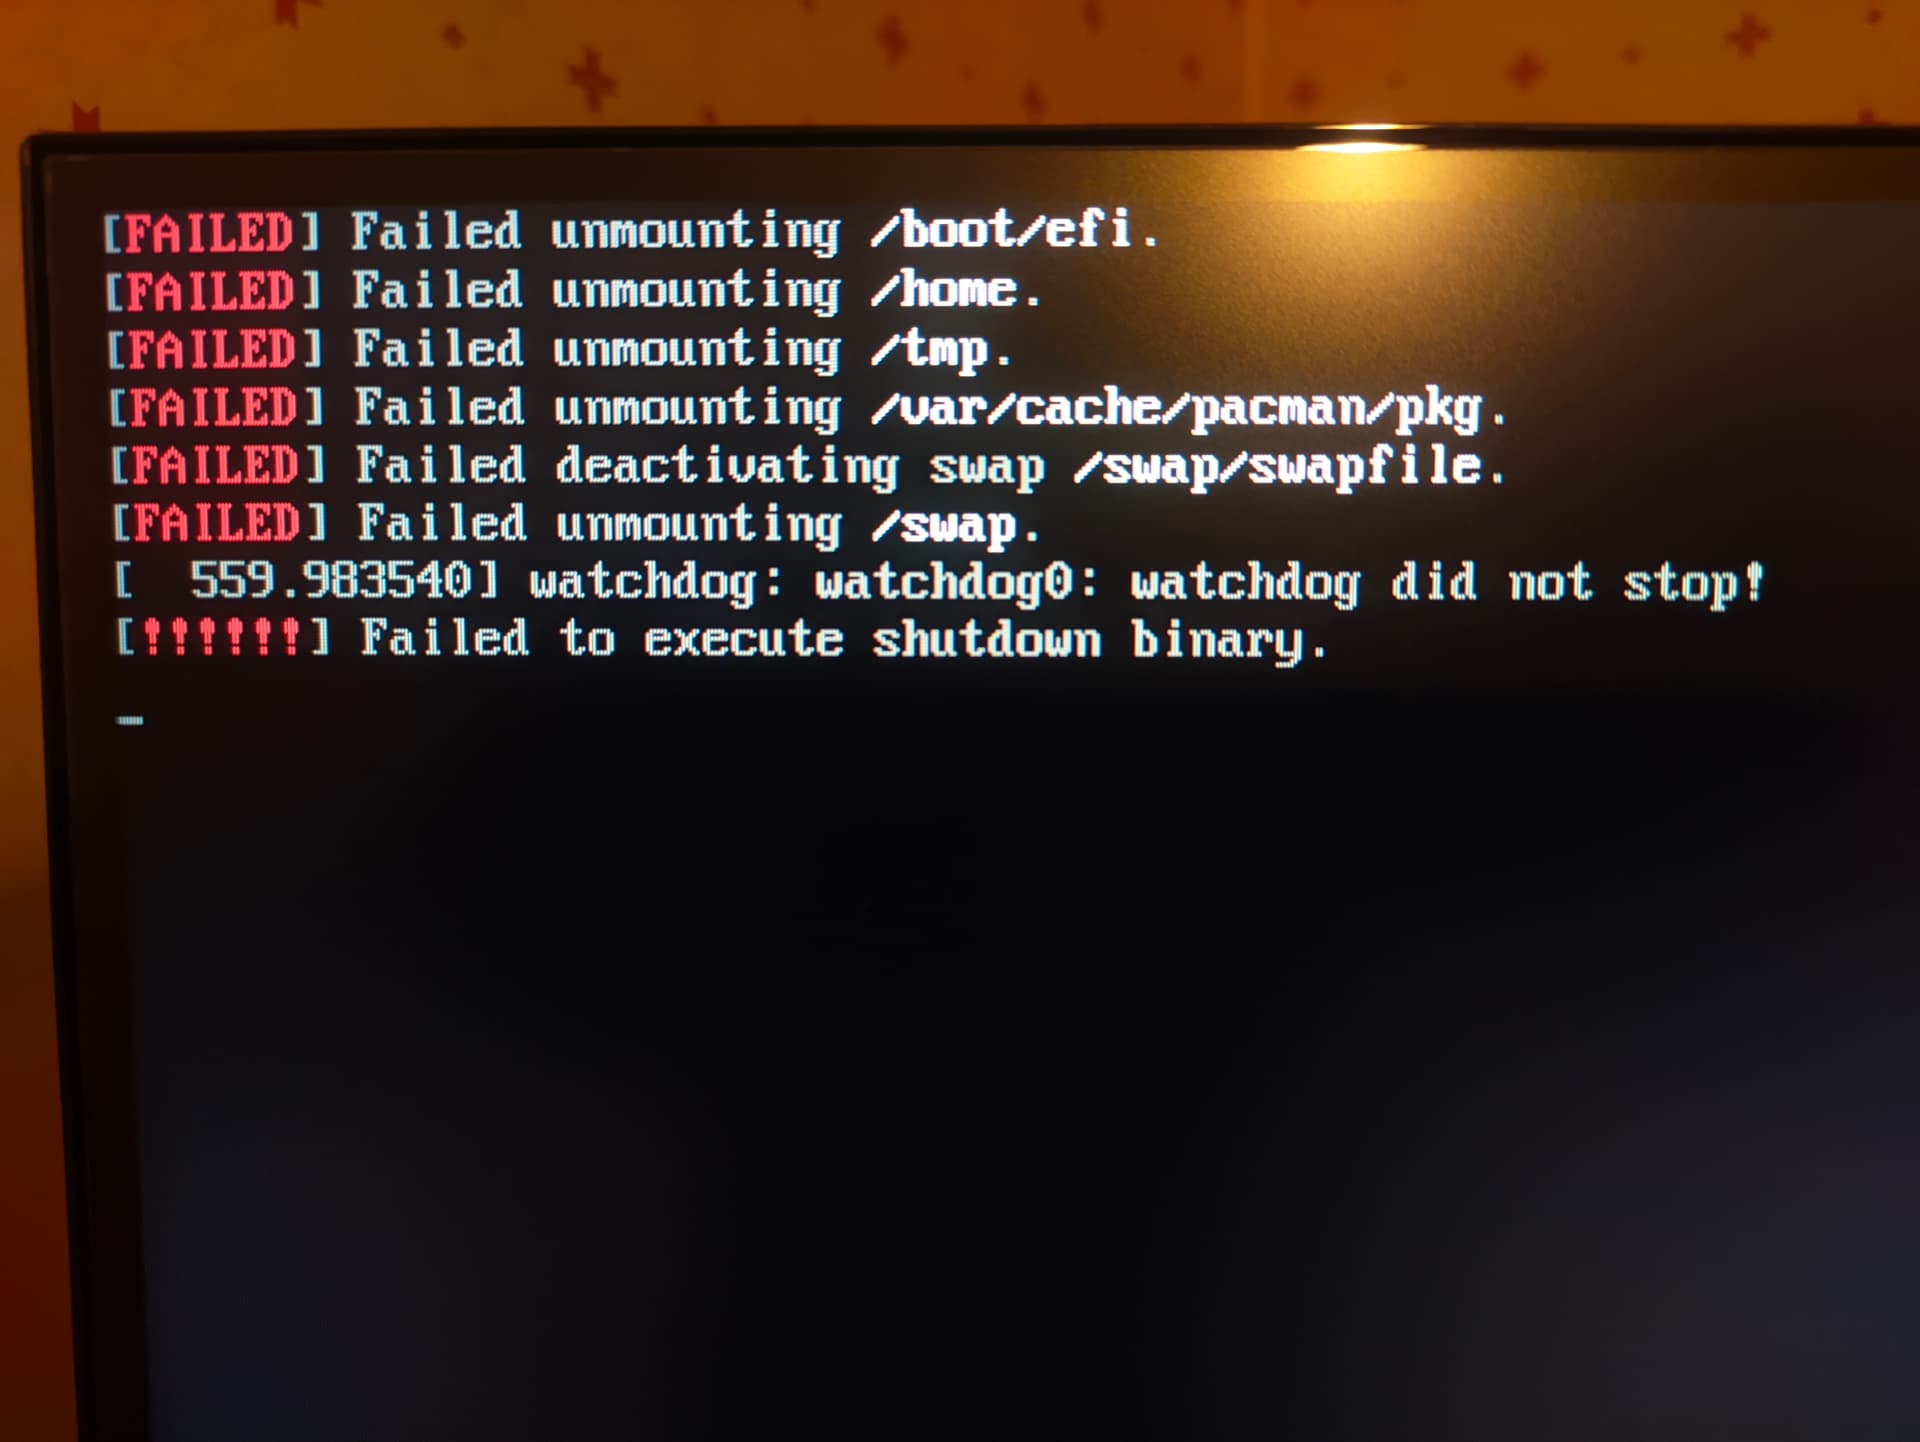 Can't chroot - can't repair grub - can't boot - messed up big time 